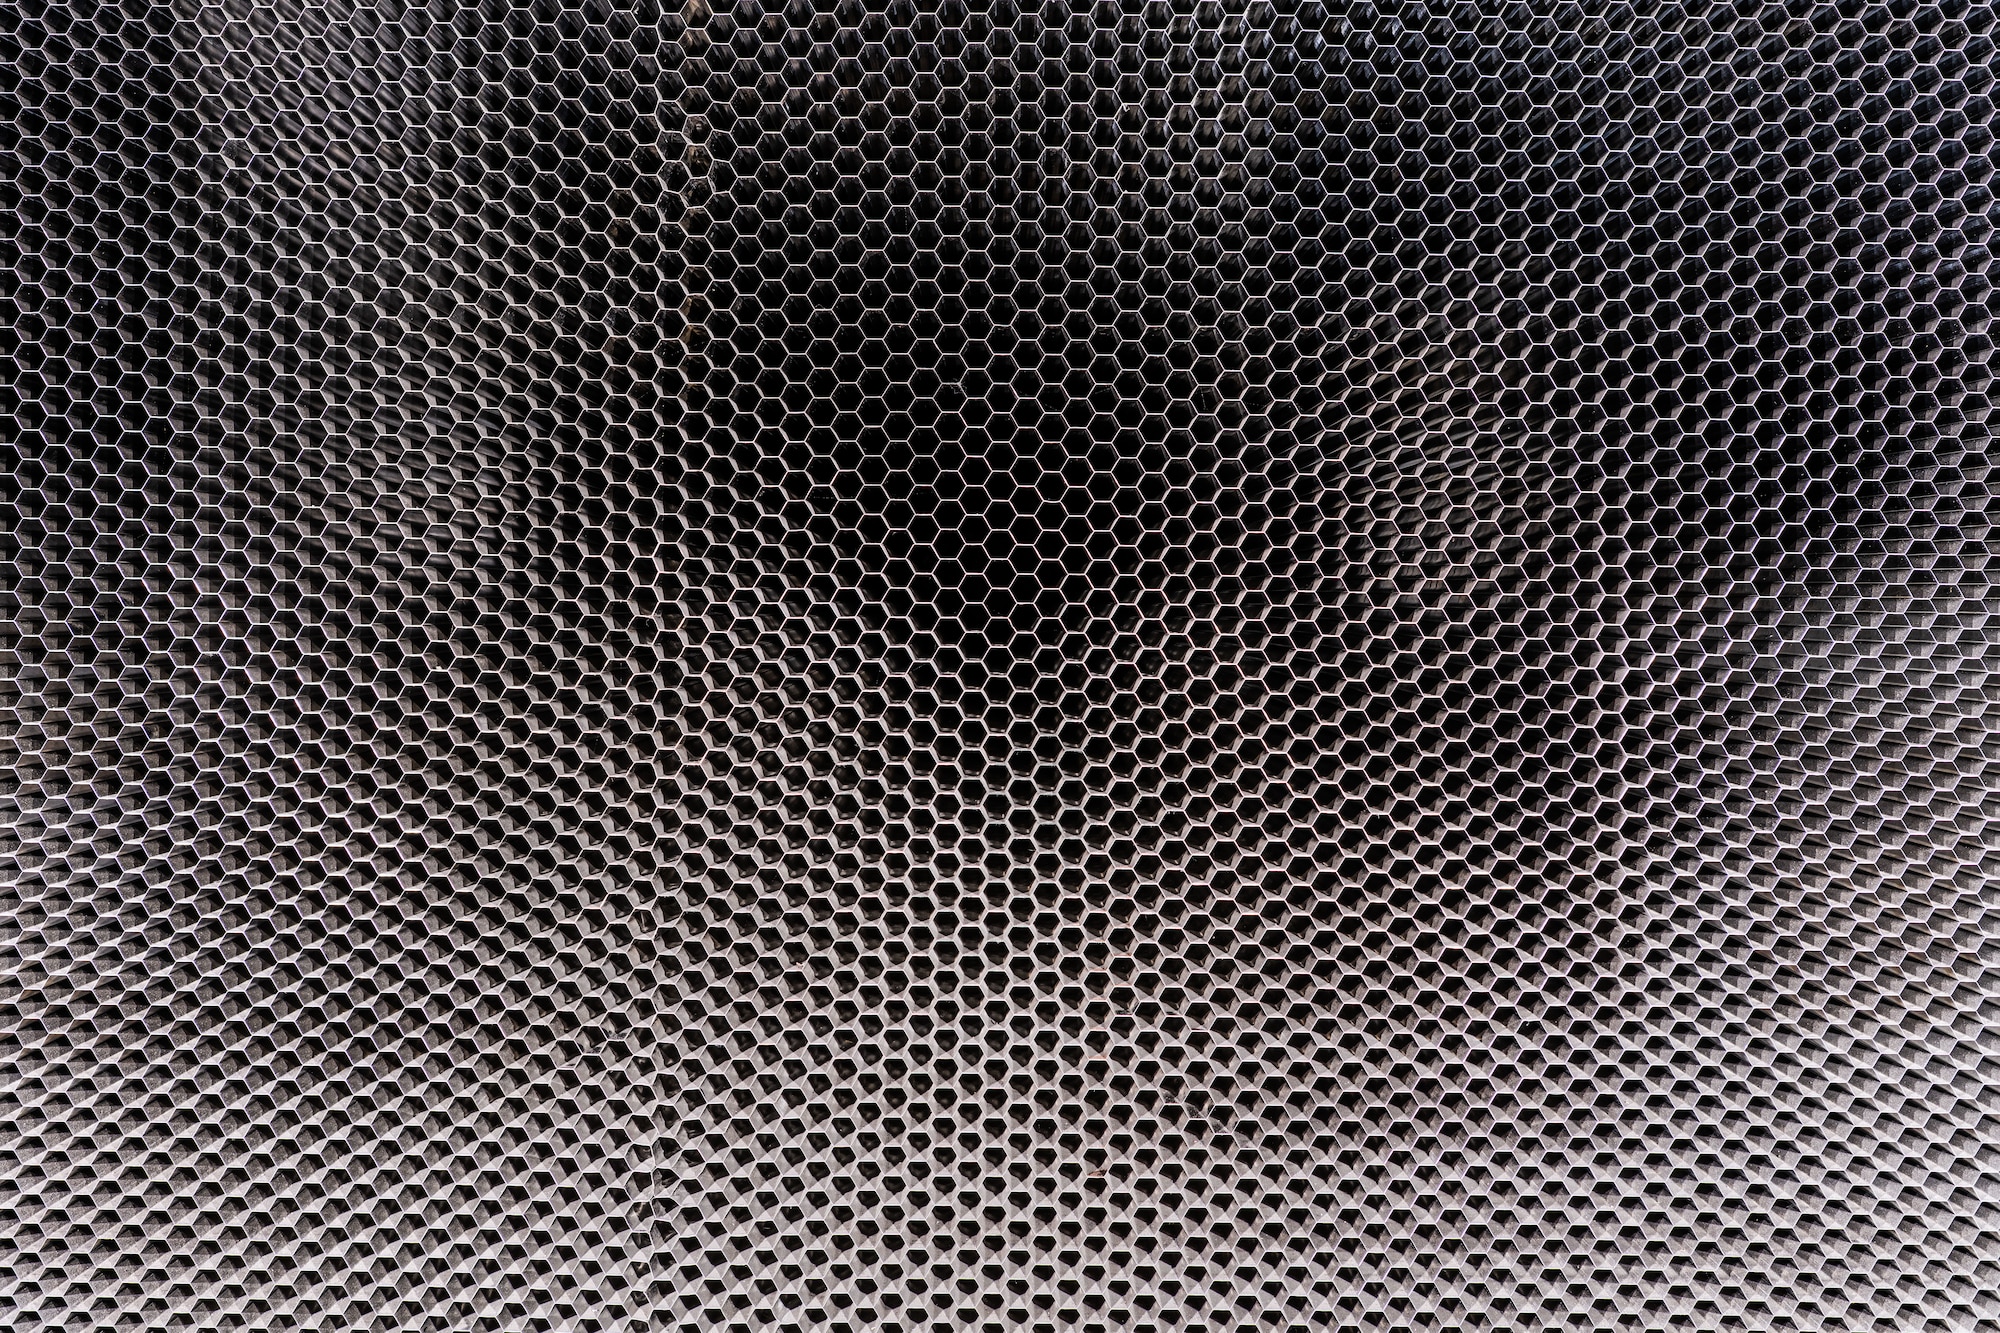 The “honeycomb” structure in the 16-foot supersonic wind tunnel at Arnold Air Force Base, Tenn., is shown. The purpose of the honeycomb is to enhance wind tunnel flow quality. The installation process was completed in October 2023. The honeycomb is a single-piece structure that measures 55 feet in diameter, 4 feet thick and weighs more than 67 tons. It is made up of thousands of stainless steel 1-inch hexagonal honeycomb tubes. (U.S. Air Force photo by Keith Thornburgh)